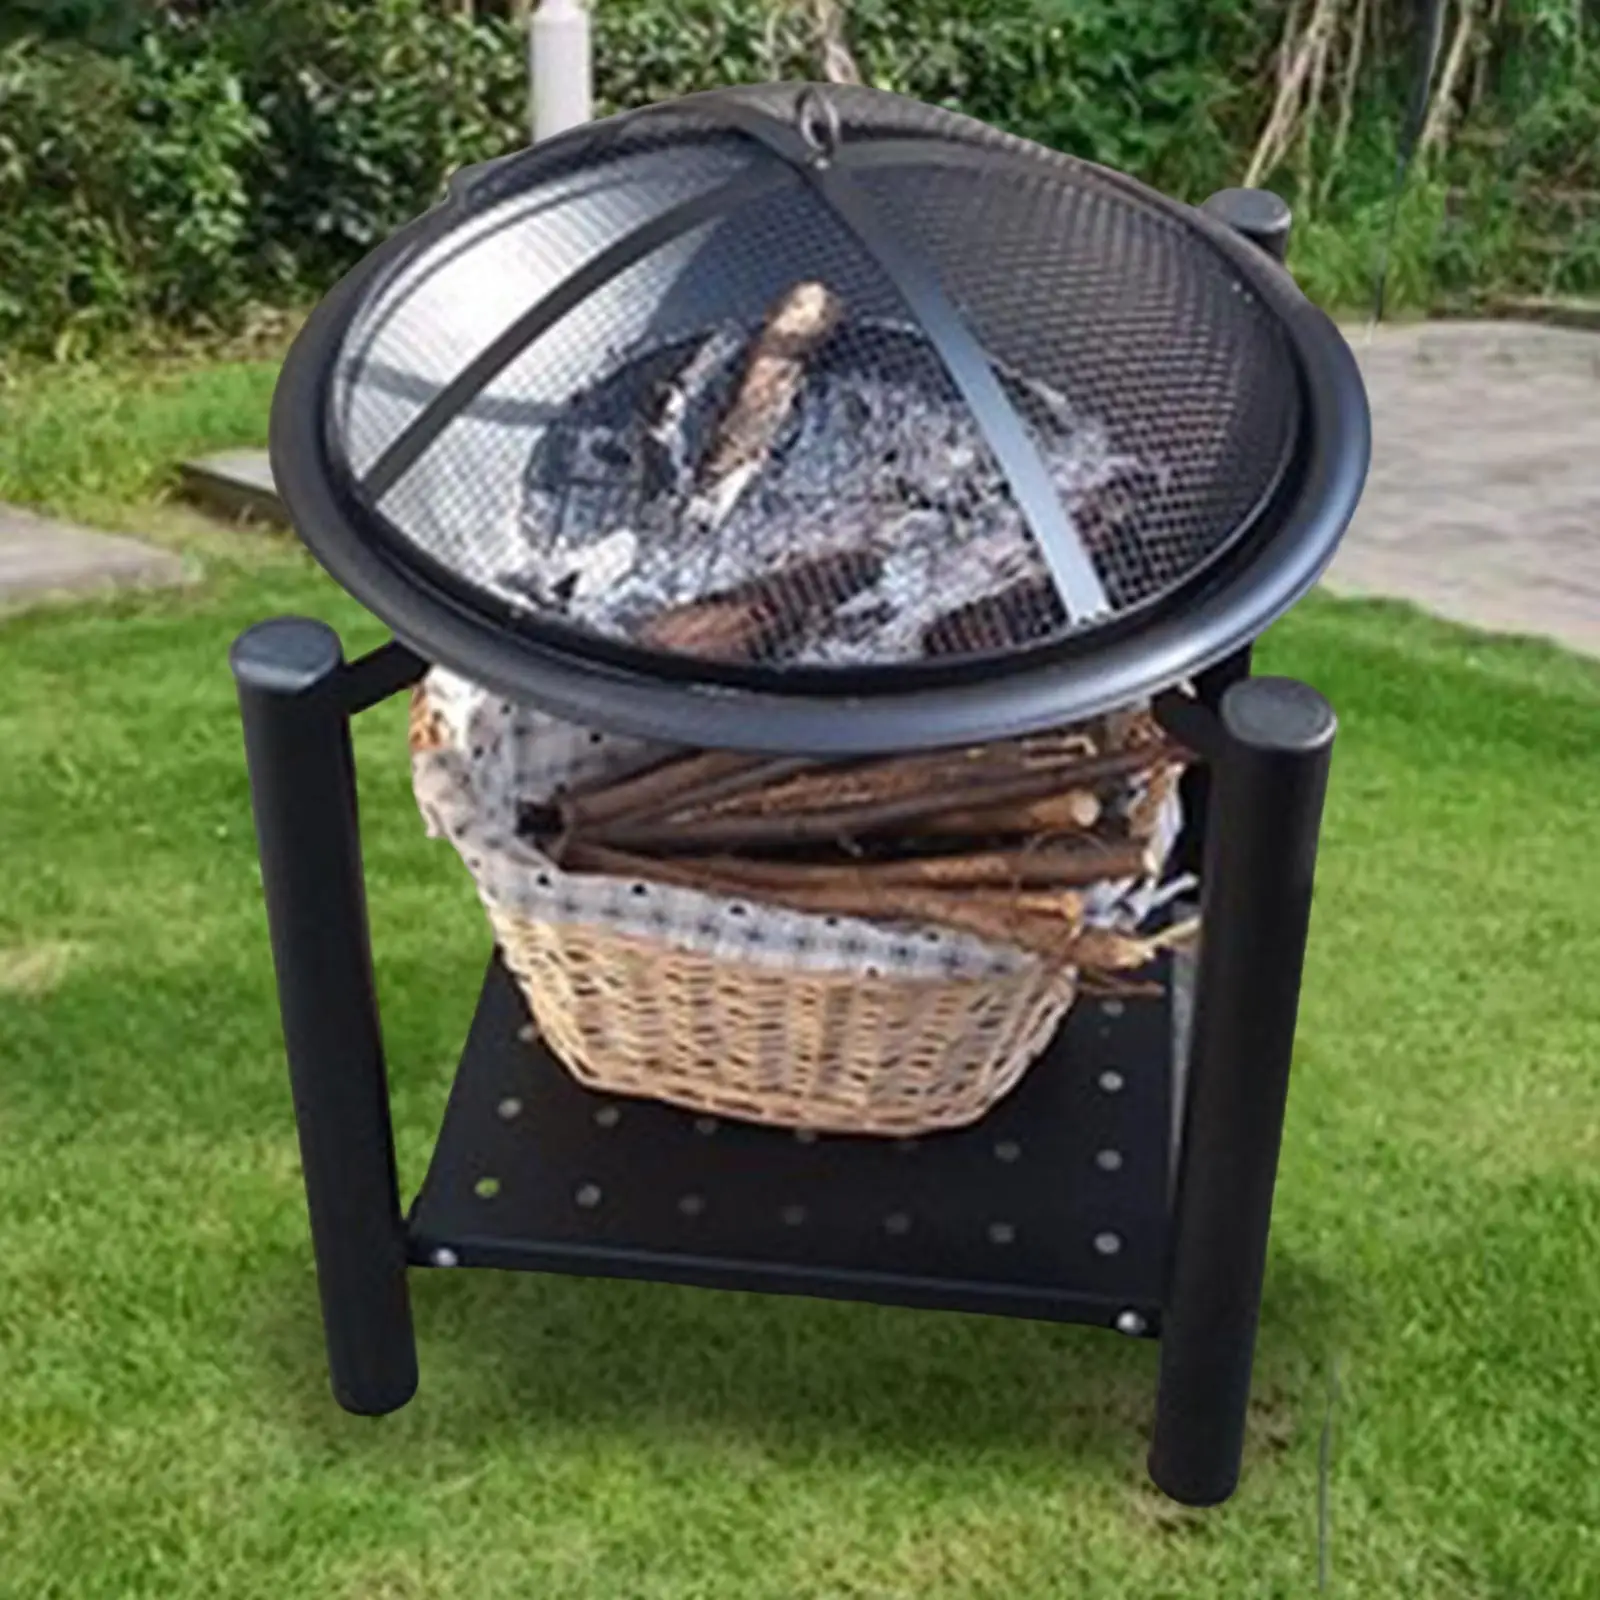 Fire Pit with Mesh Spark Screen with Grill Bowl Fireplace with Brazier Heater for Backyard Garden Camping Outdoor